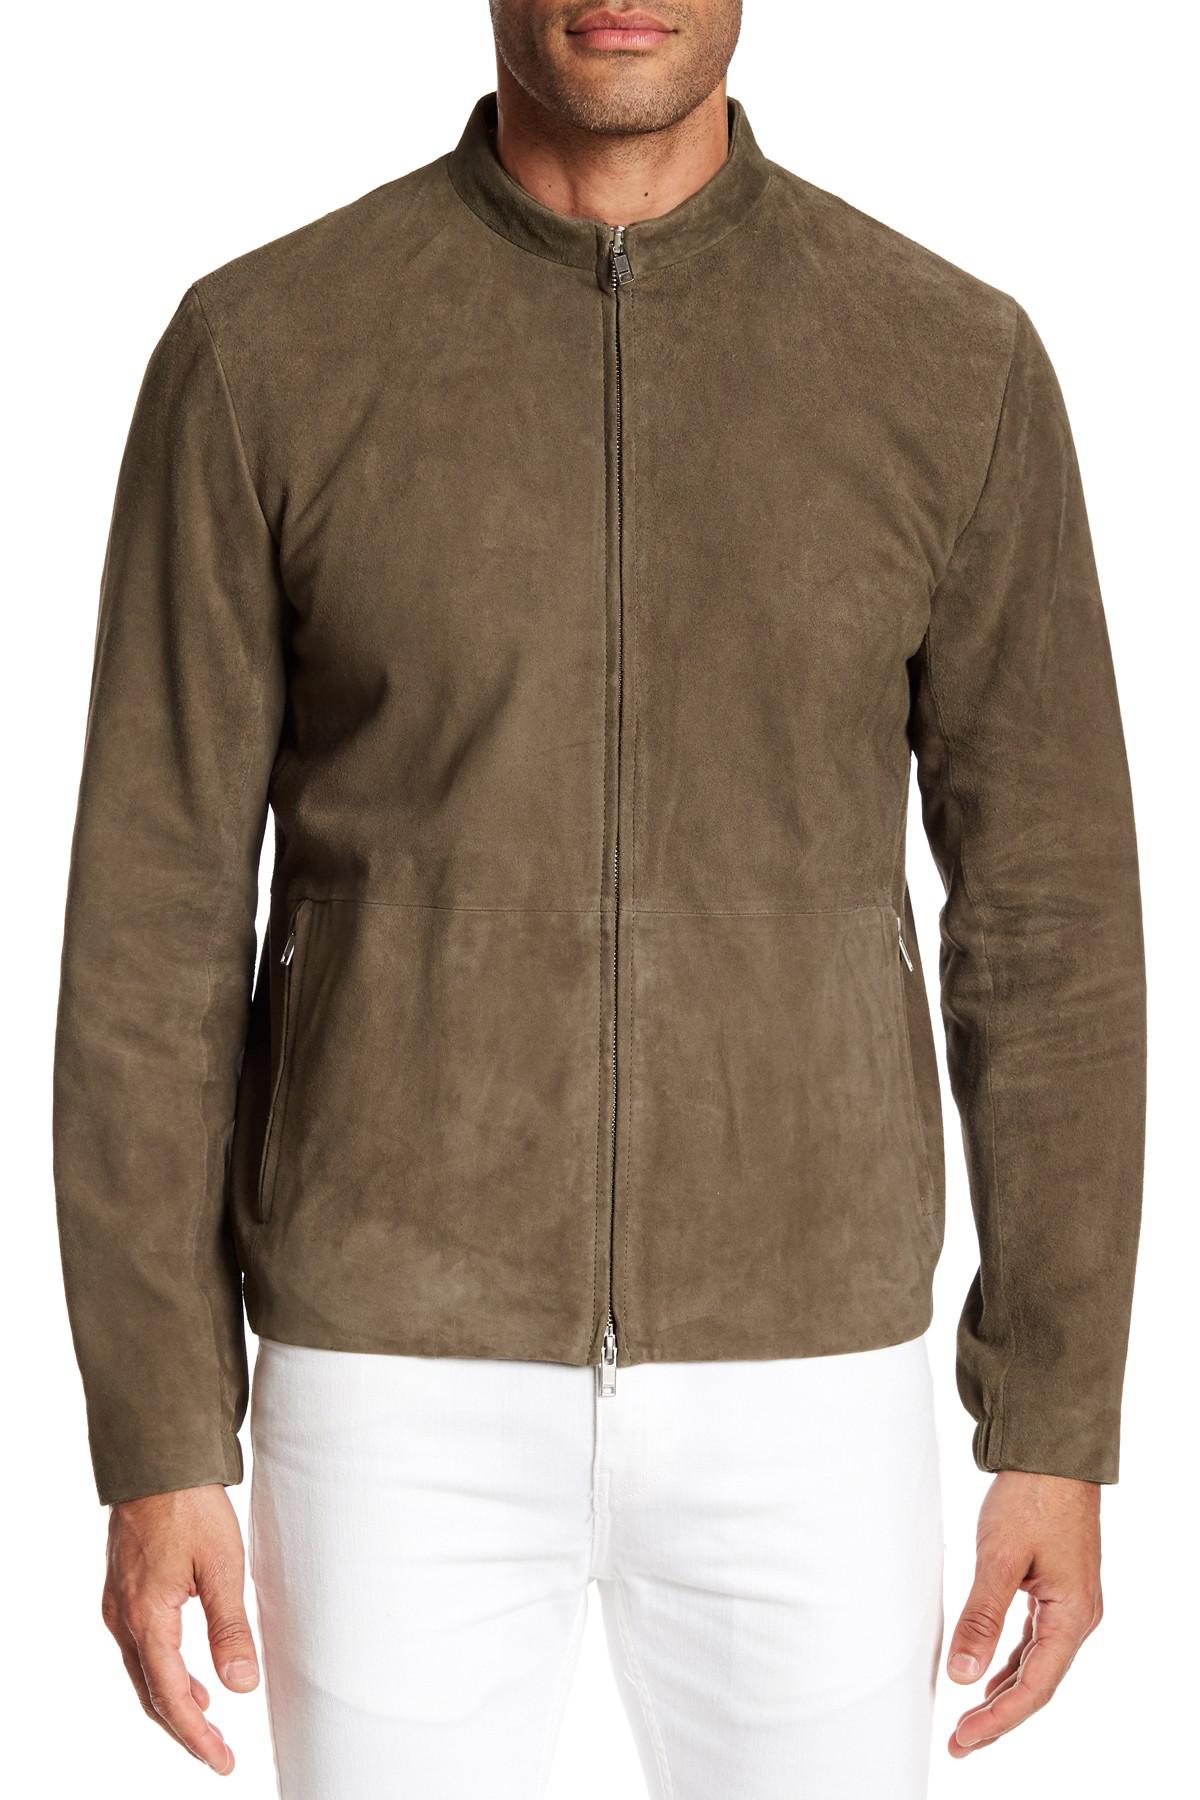 Lyst - Theory Zip Suede Jacket in Brown for Men